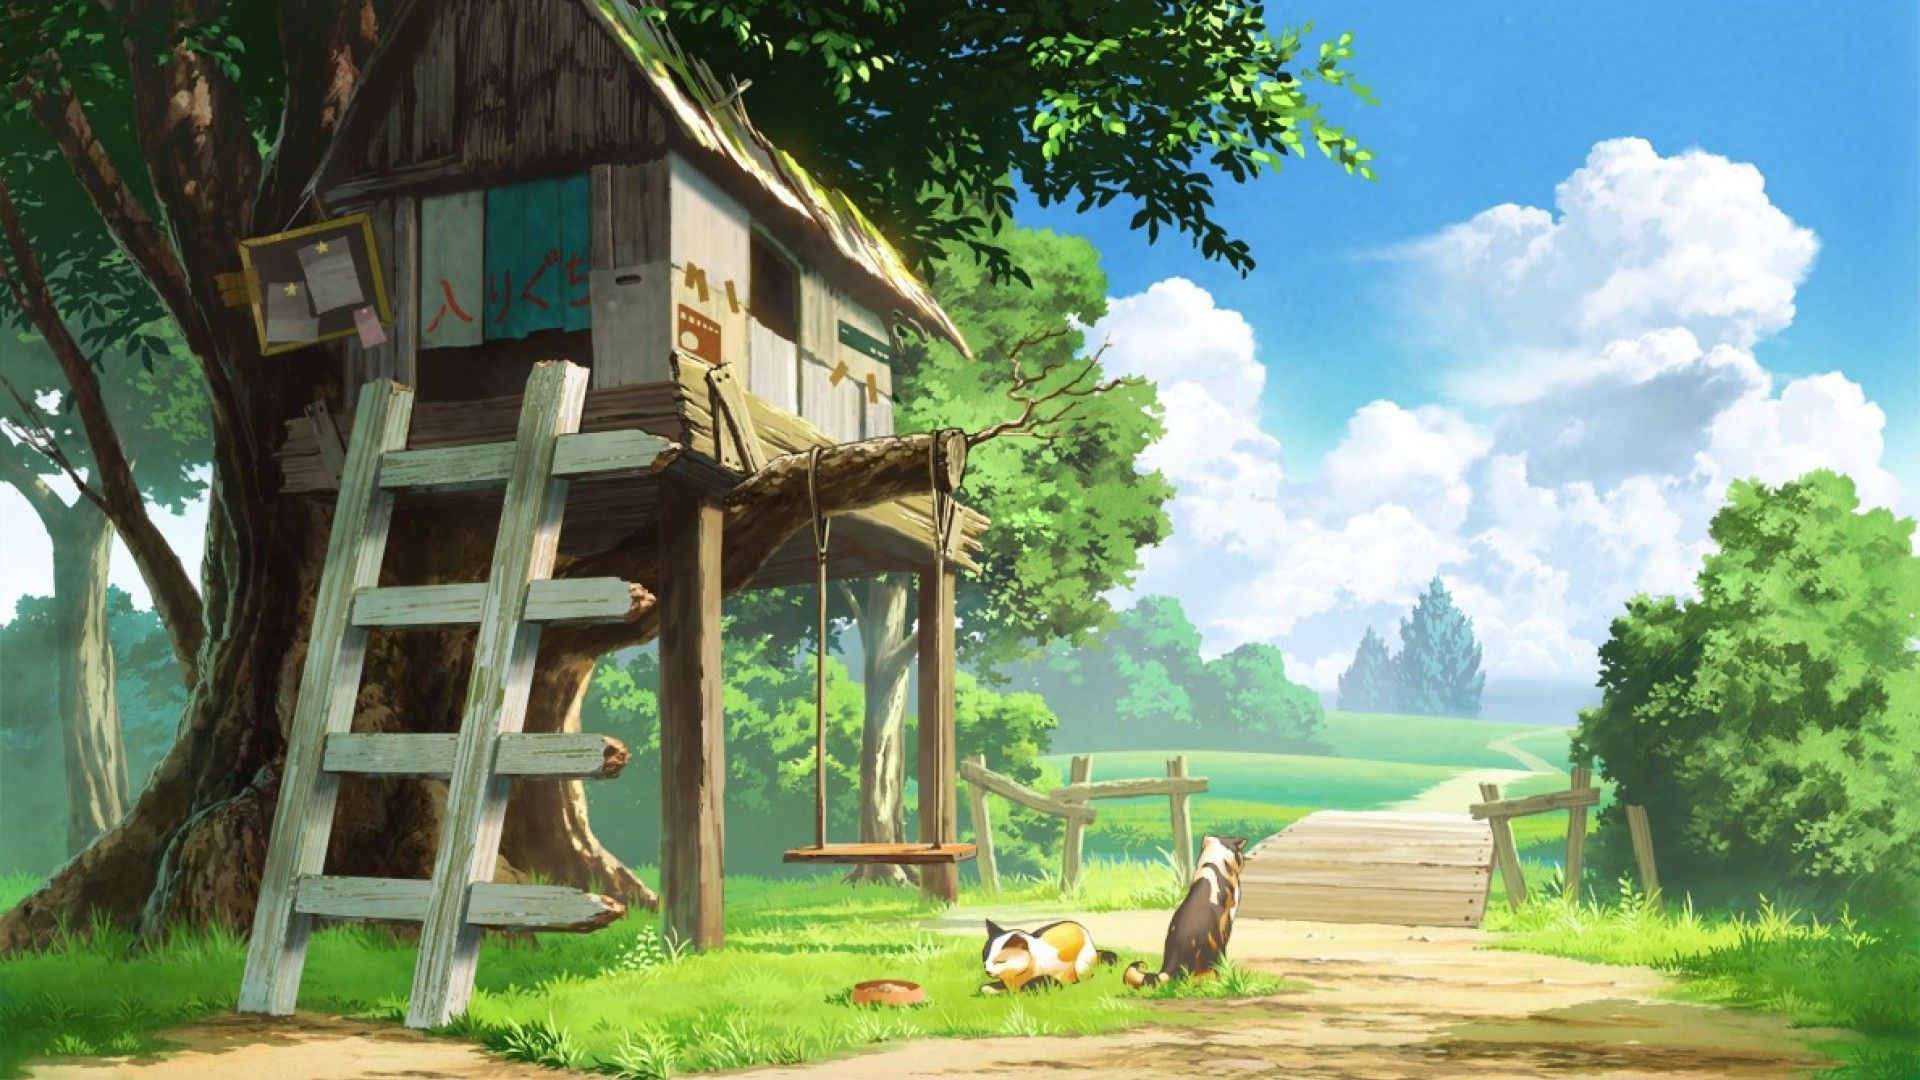 Different Places to Visit. Tree house wallpaper, Anime scenery wallpaper, Tree house